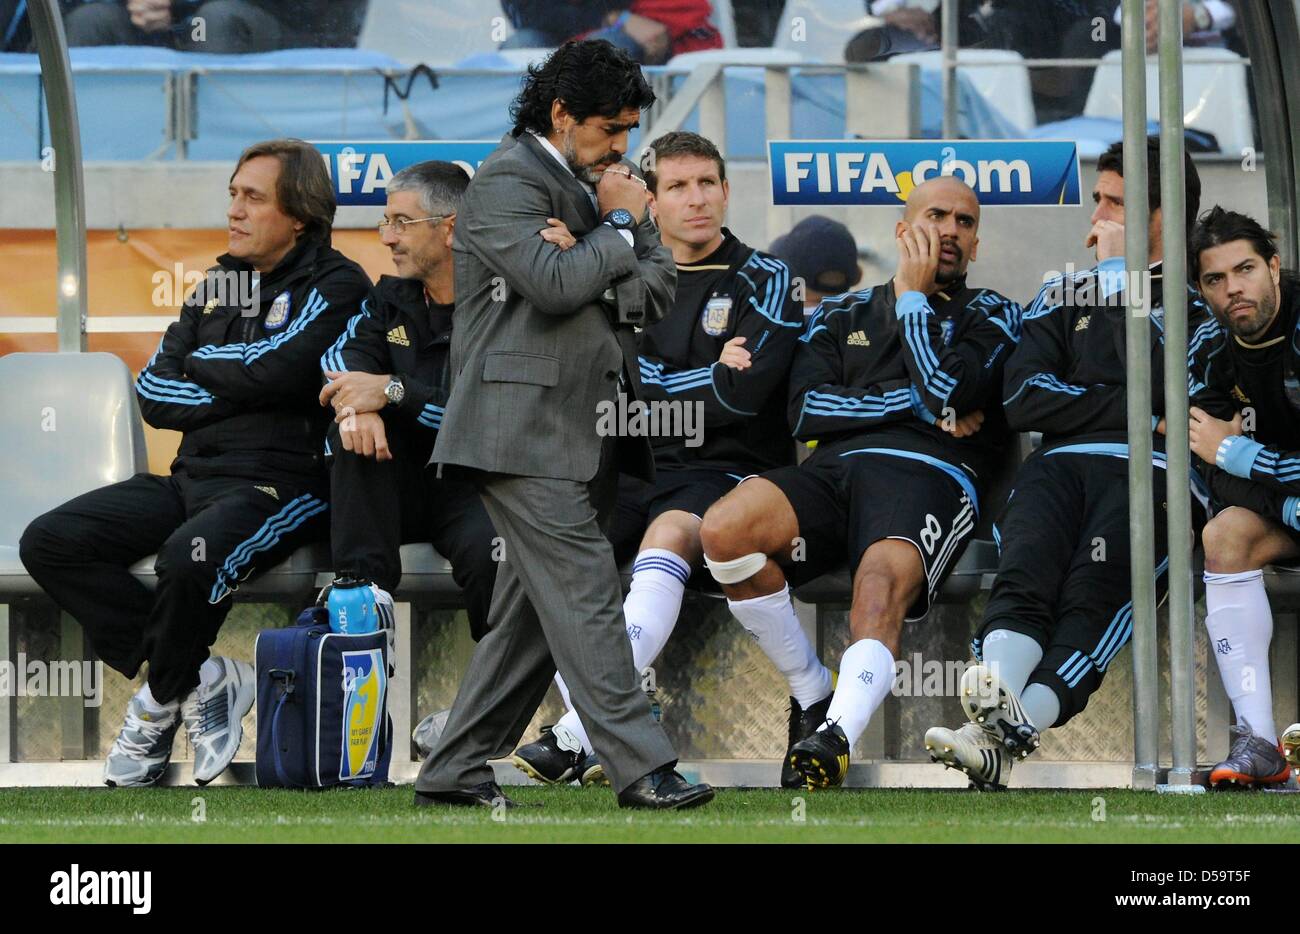 Argentina's coach Diego Armando Maradona during the 2010 FIFA World Cup quarterfinal match between Argentina and Germany at the Green Point Stadium in Cape Town, South Africa 03 July 2010. Photo: Marcus Brandt dpa - Please refer to http://dpaq.de/FIFA-WM2010-TC  +++(c) dpa - Bildfunk+++ Stock Photo